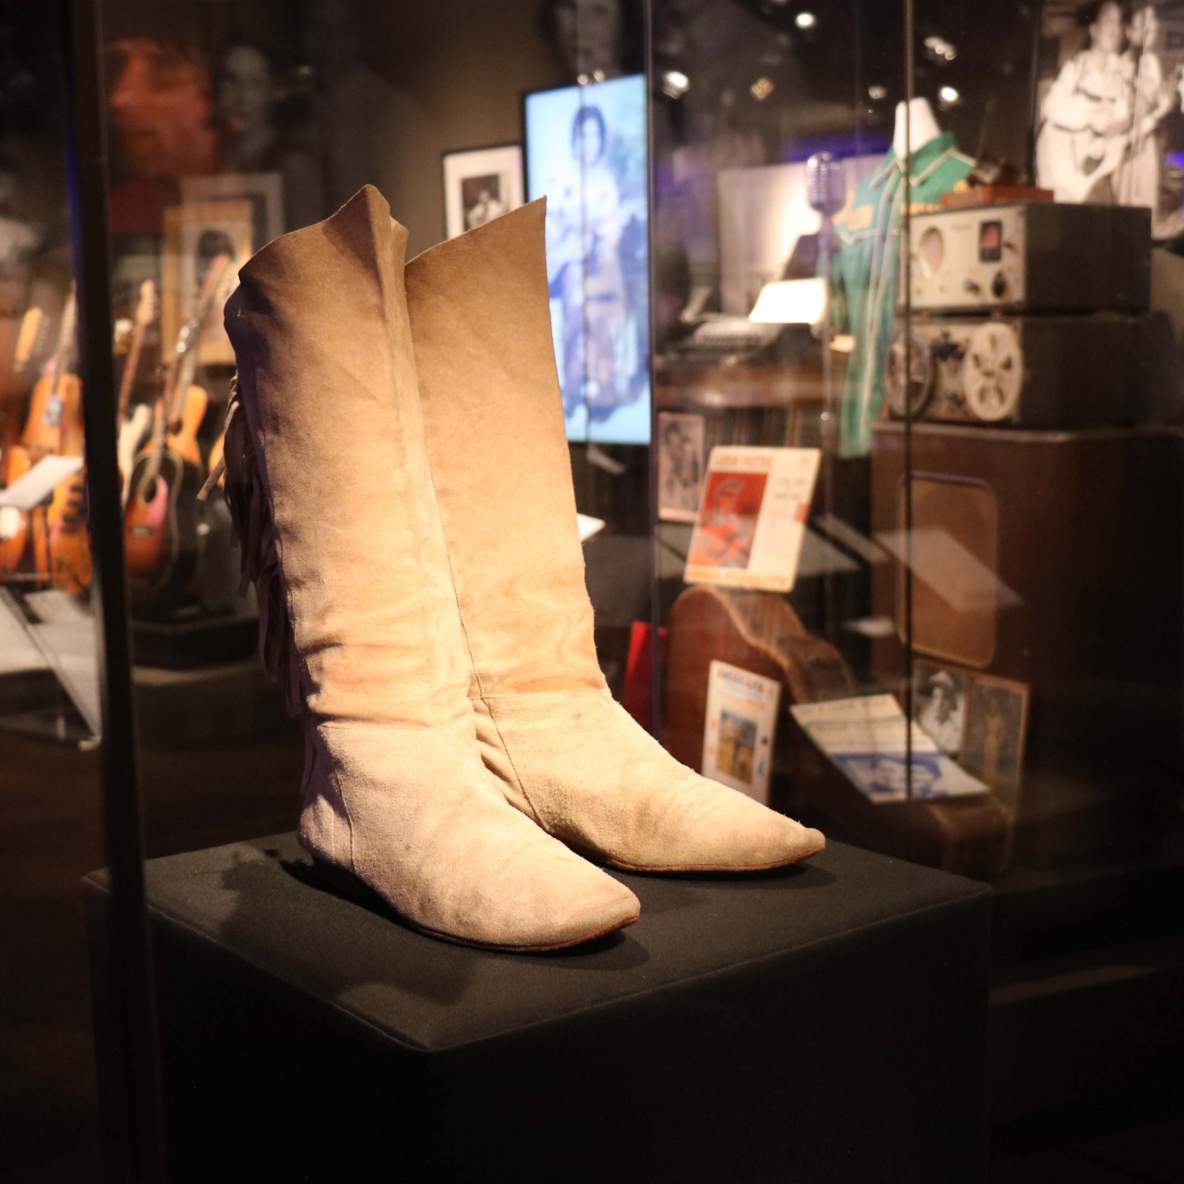 Photo of boots on display